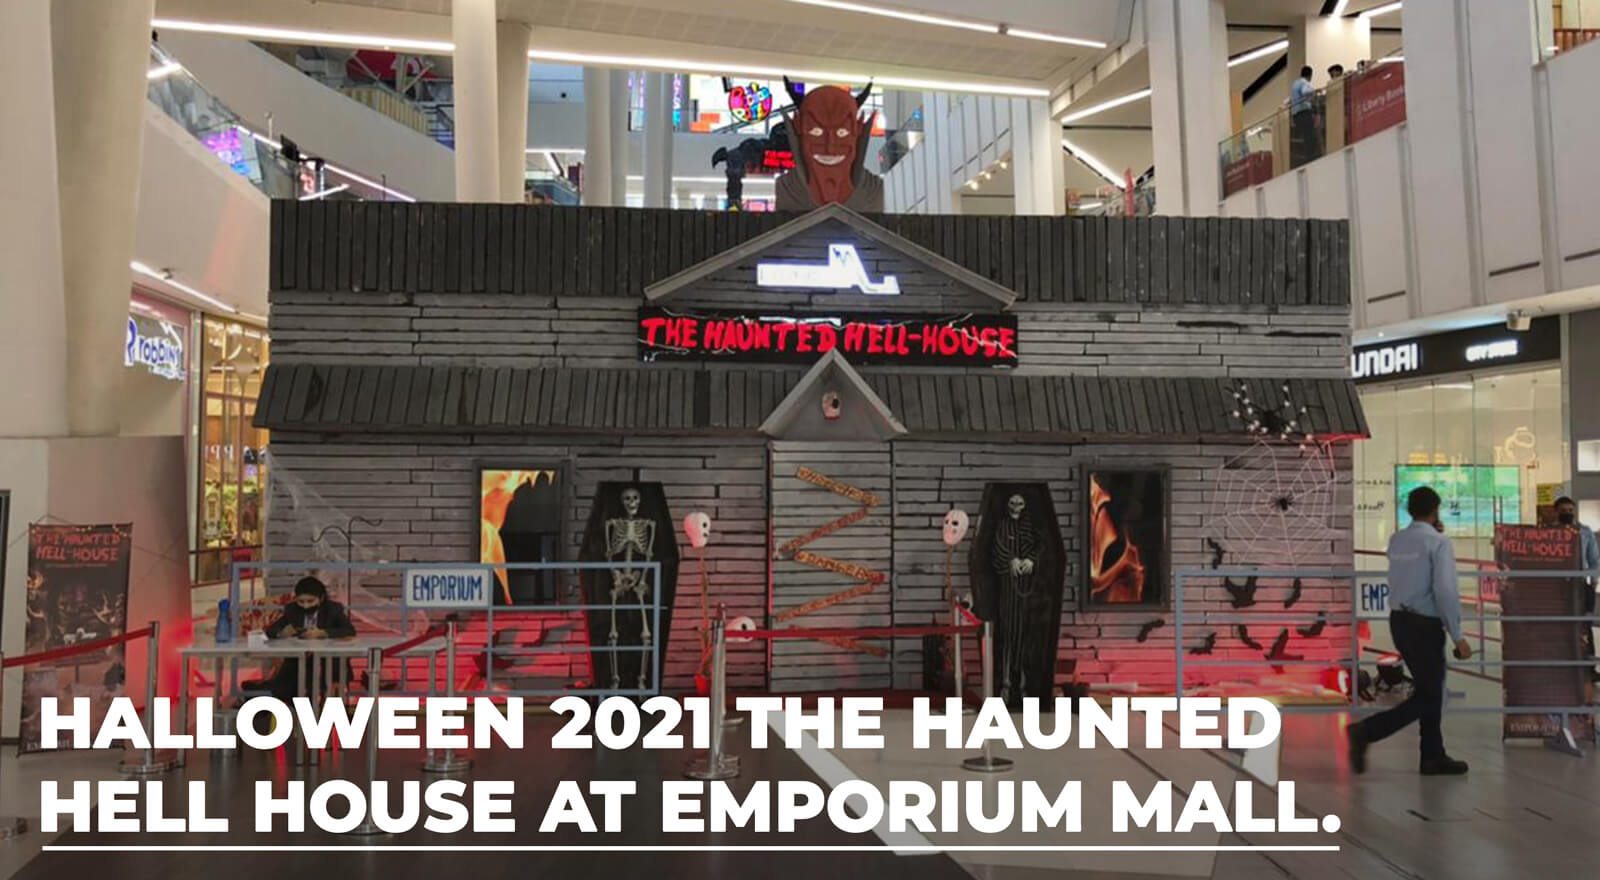 The Haunted Hell House At Emporium Mall